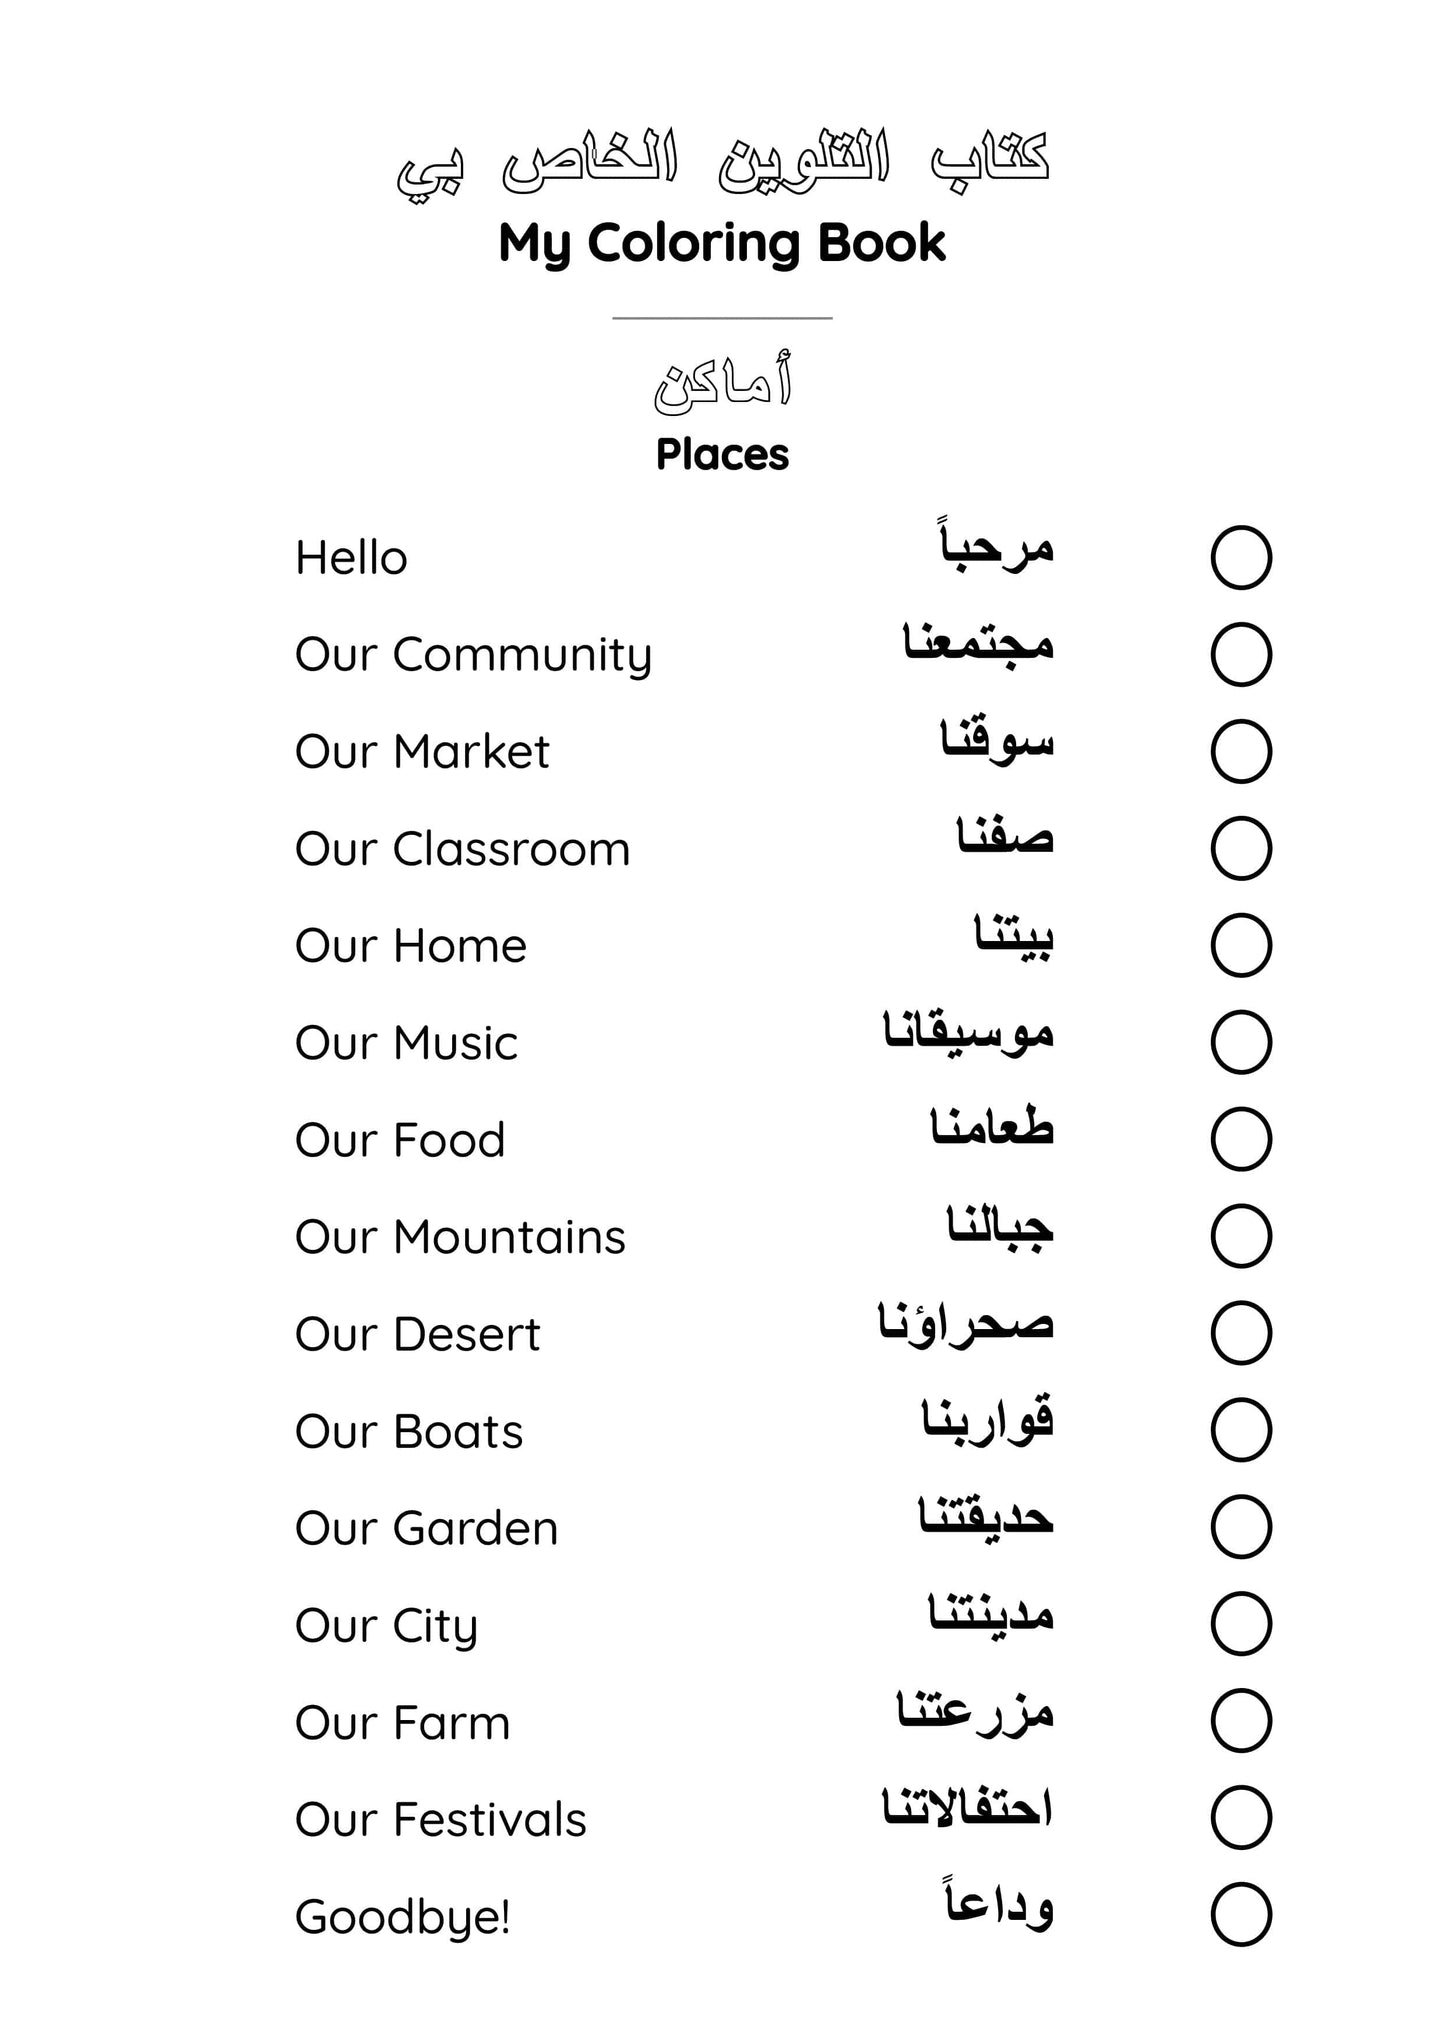 My Coloring Book | Syrian: Places